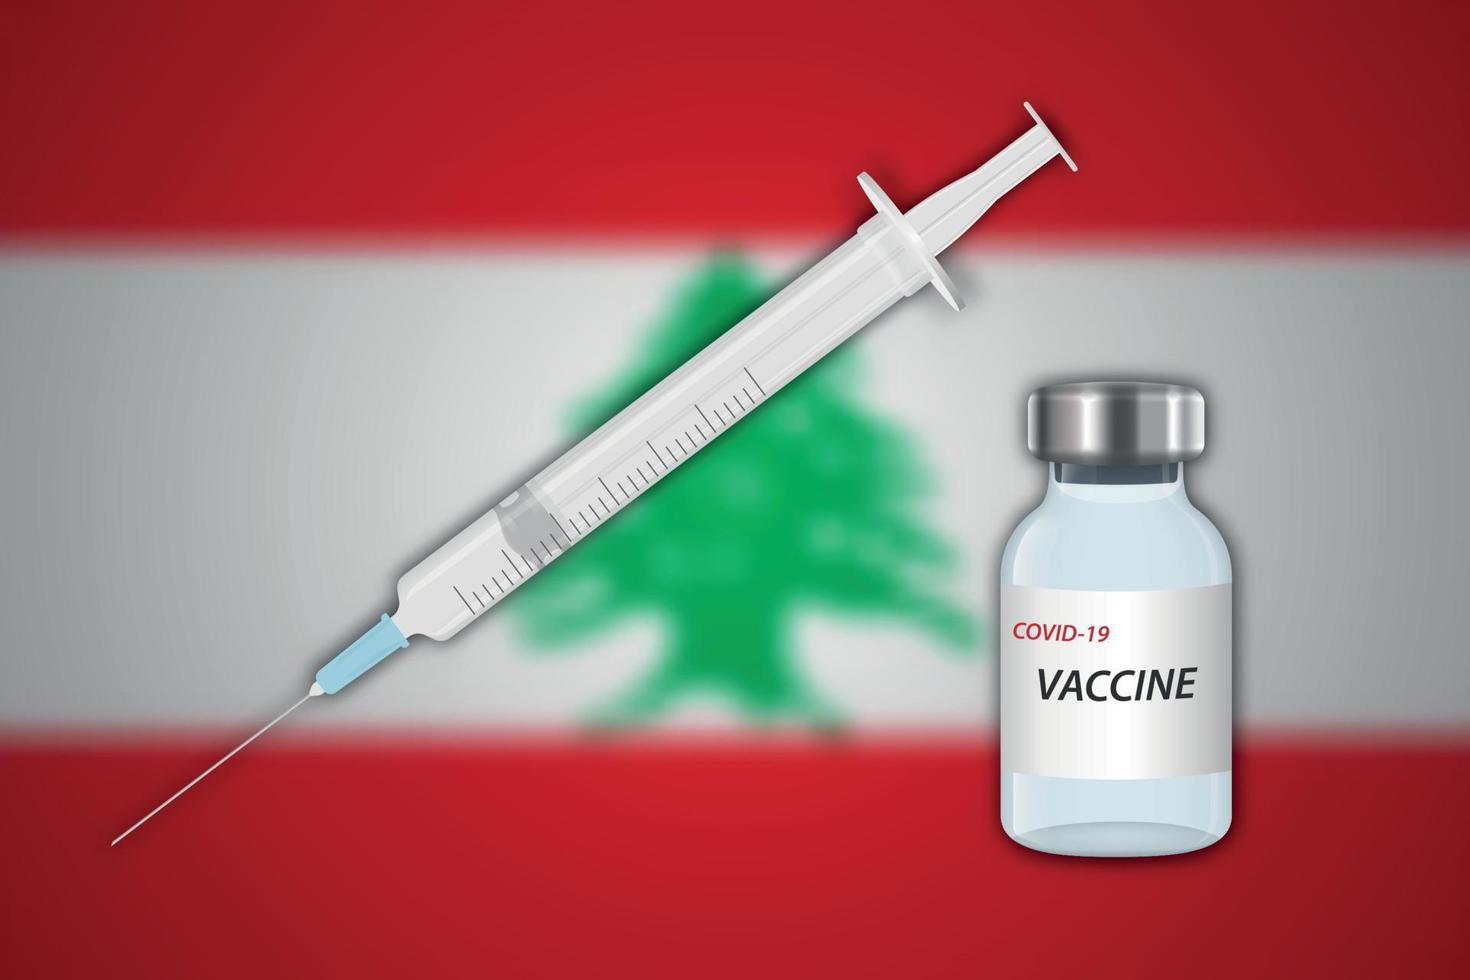 Syringe and vaccine vial on blur background with Lebanon flag vector